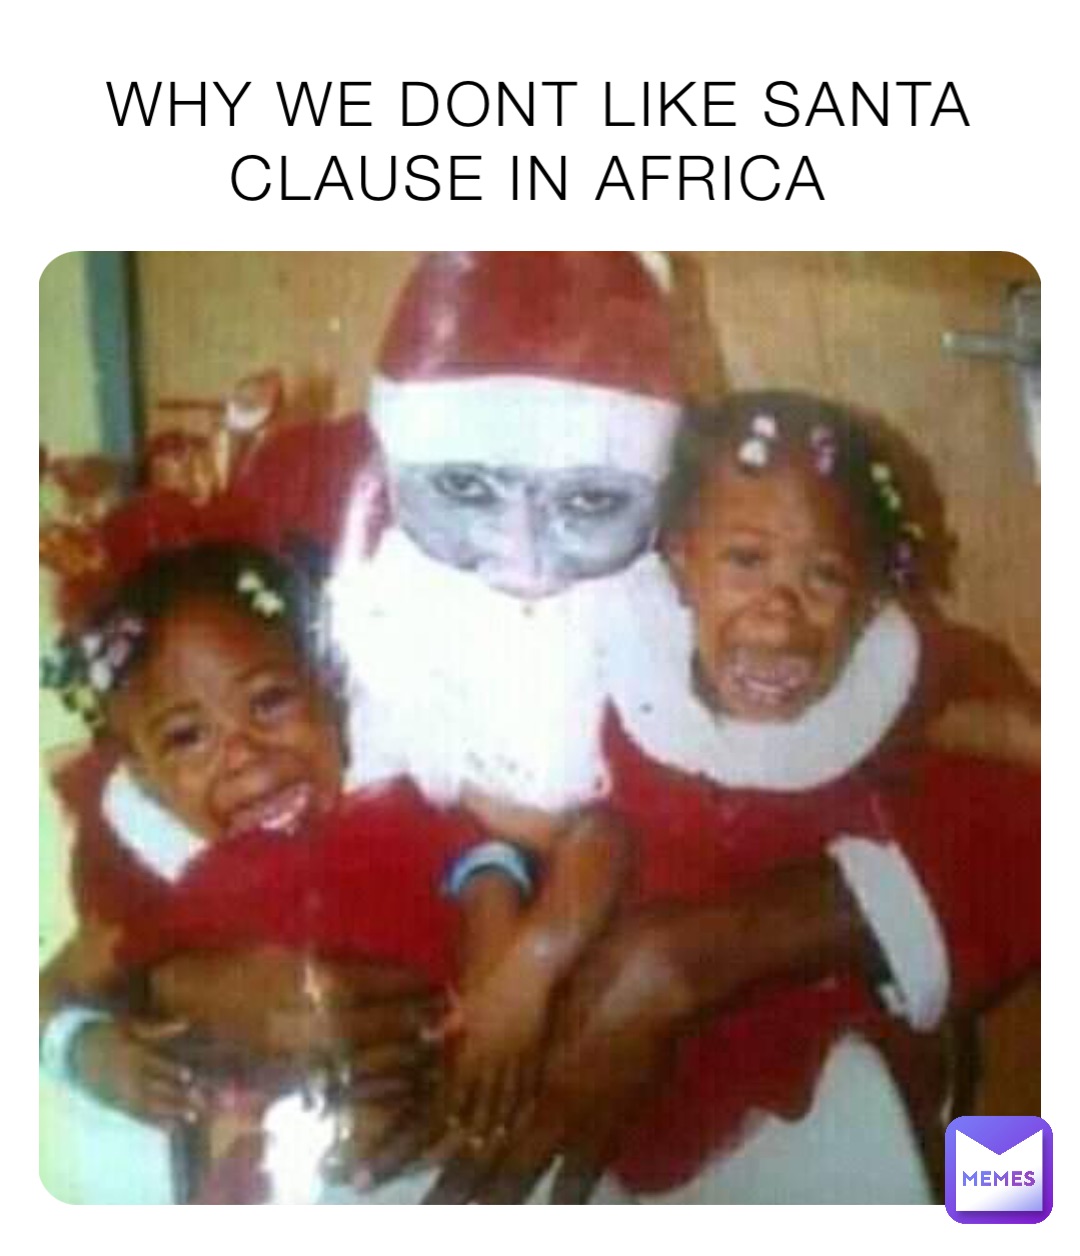 WHY WE DONT LIKE SANTA CLAUSE IN AFRICA